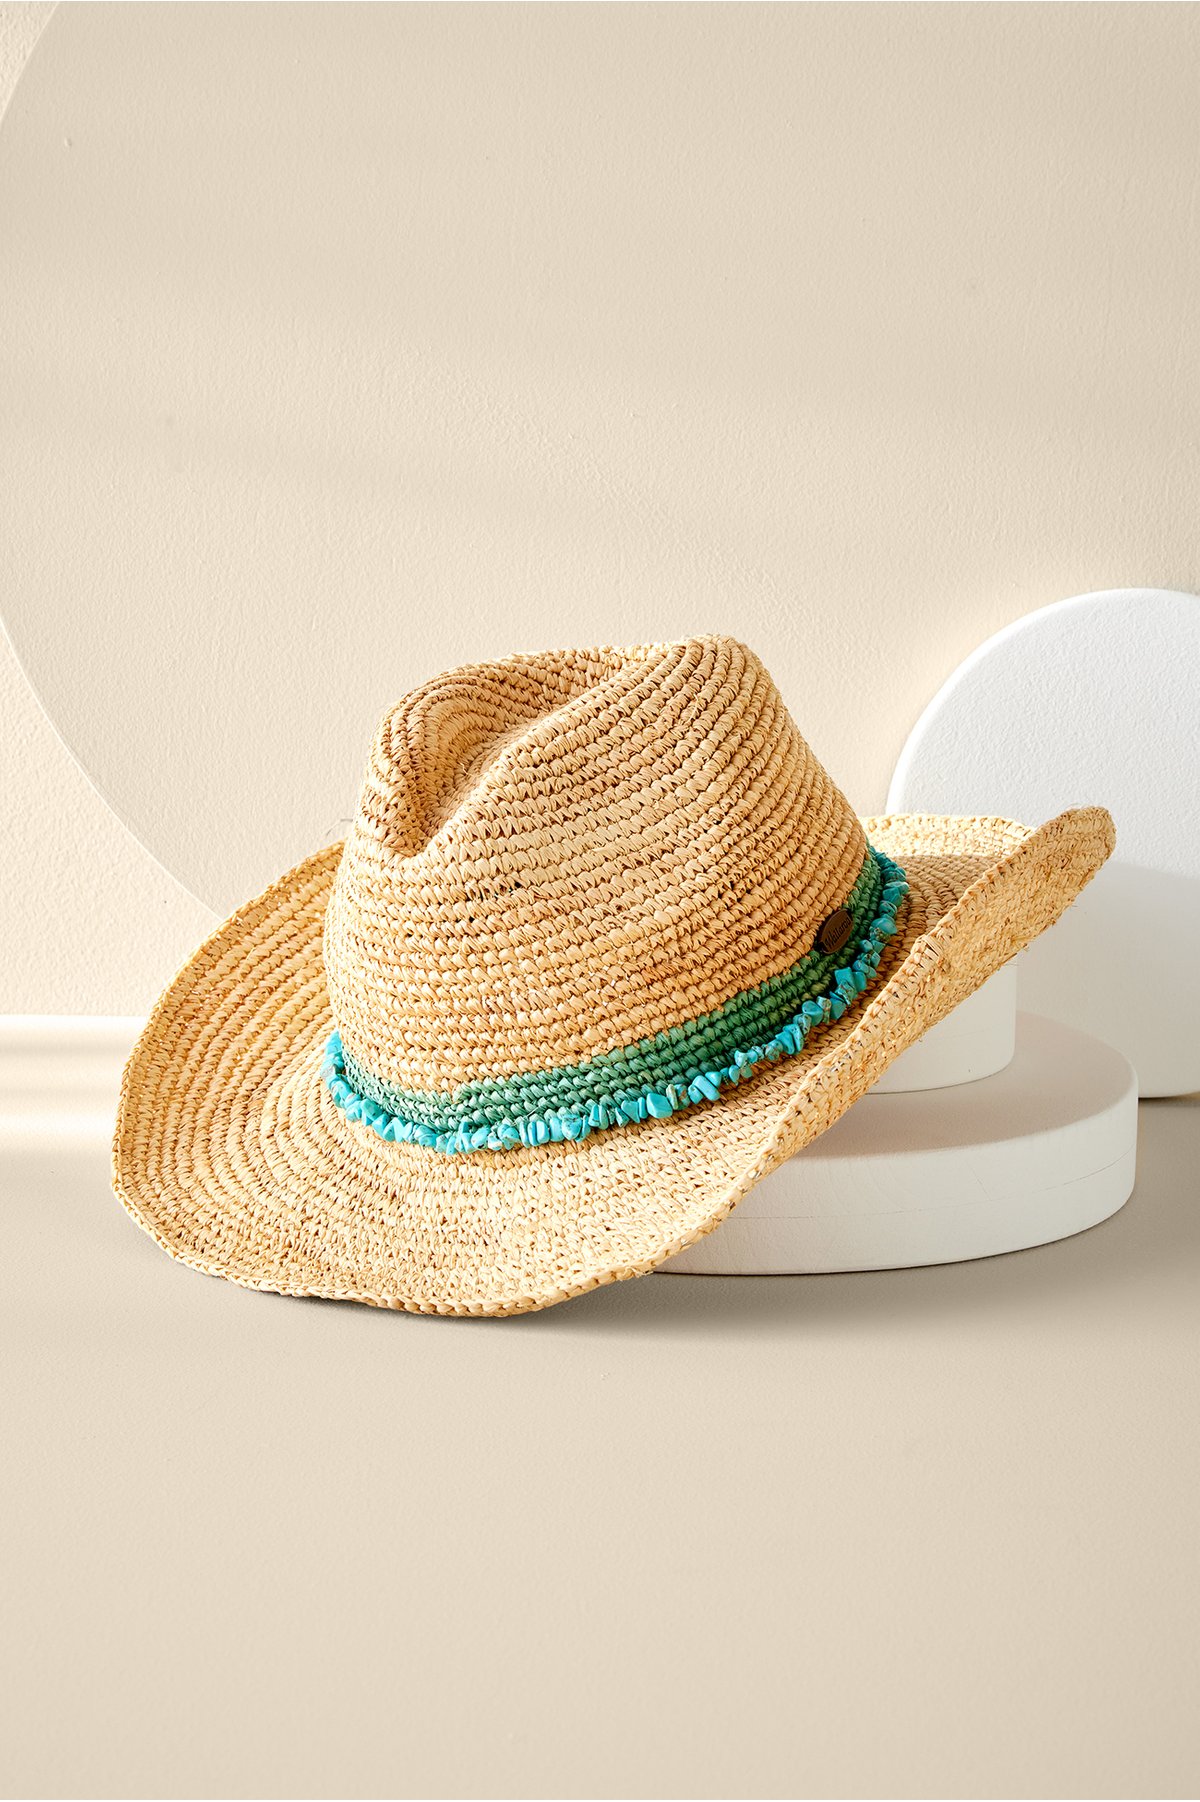 Women's Tahitian Cowboy Hat by Soft Surroundings, in Turquoise size One Size